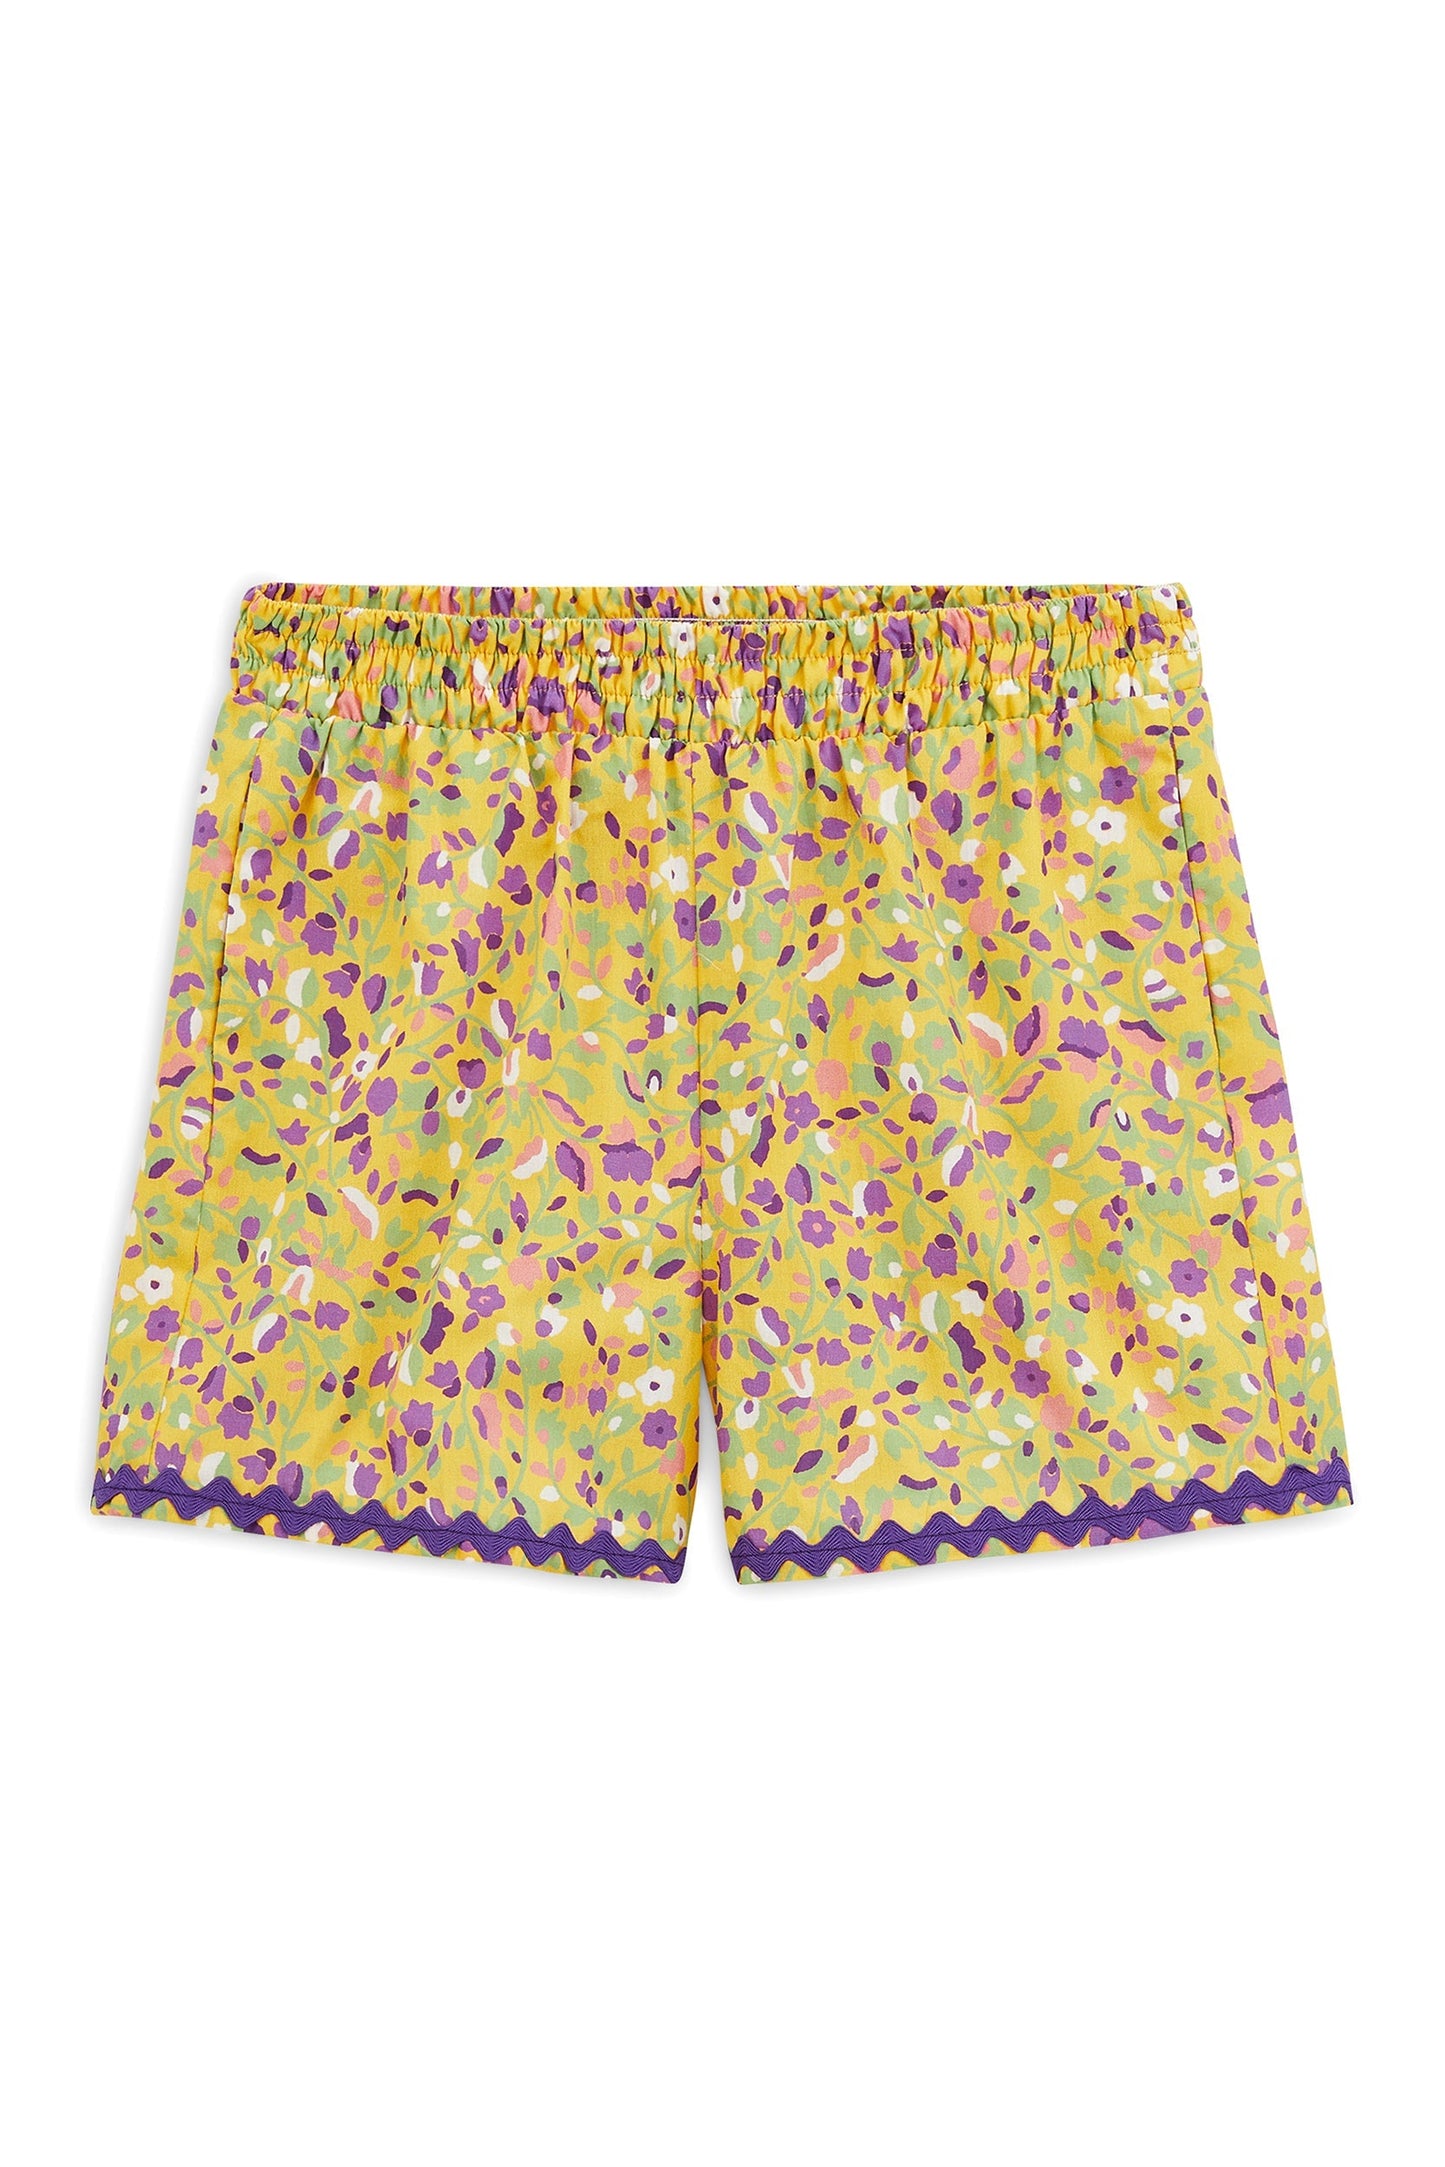 Curious shorts with a myriad of flowers print